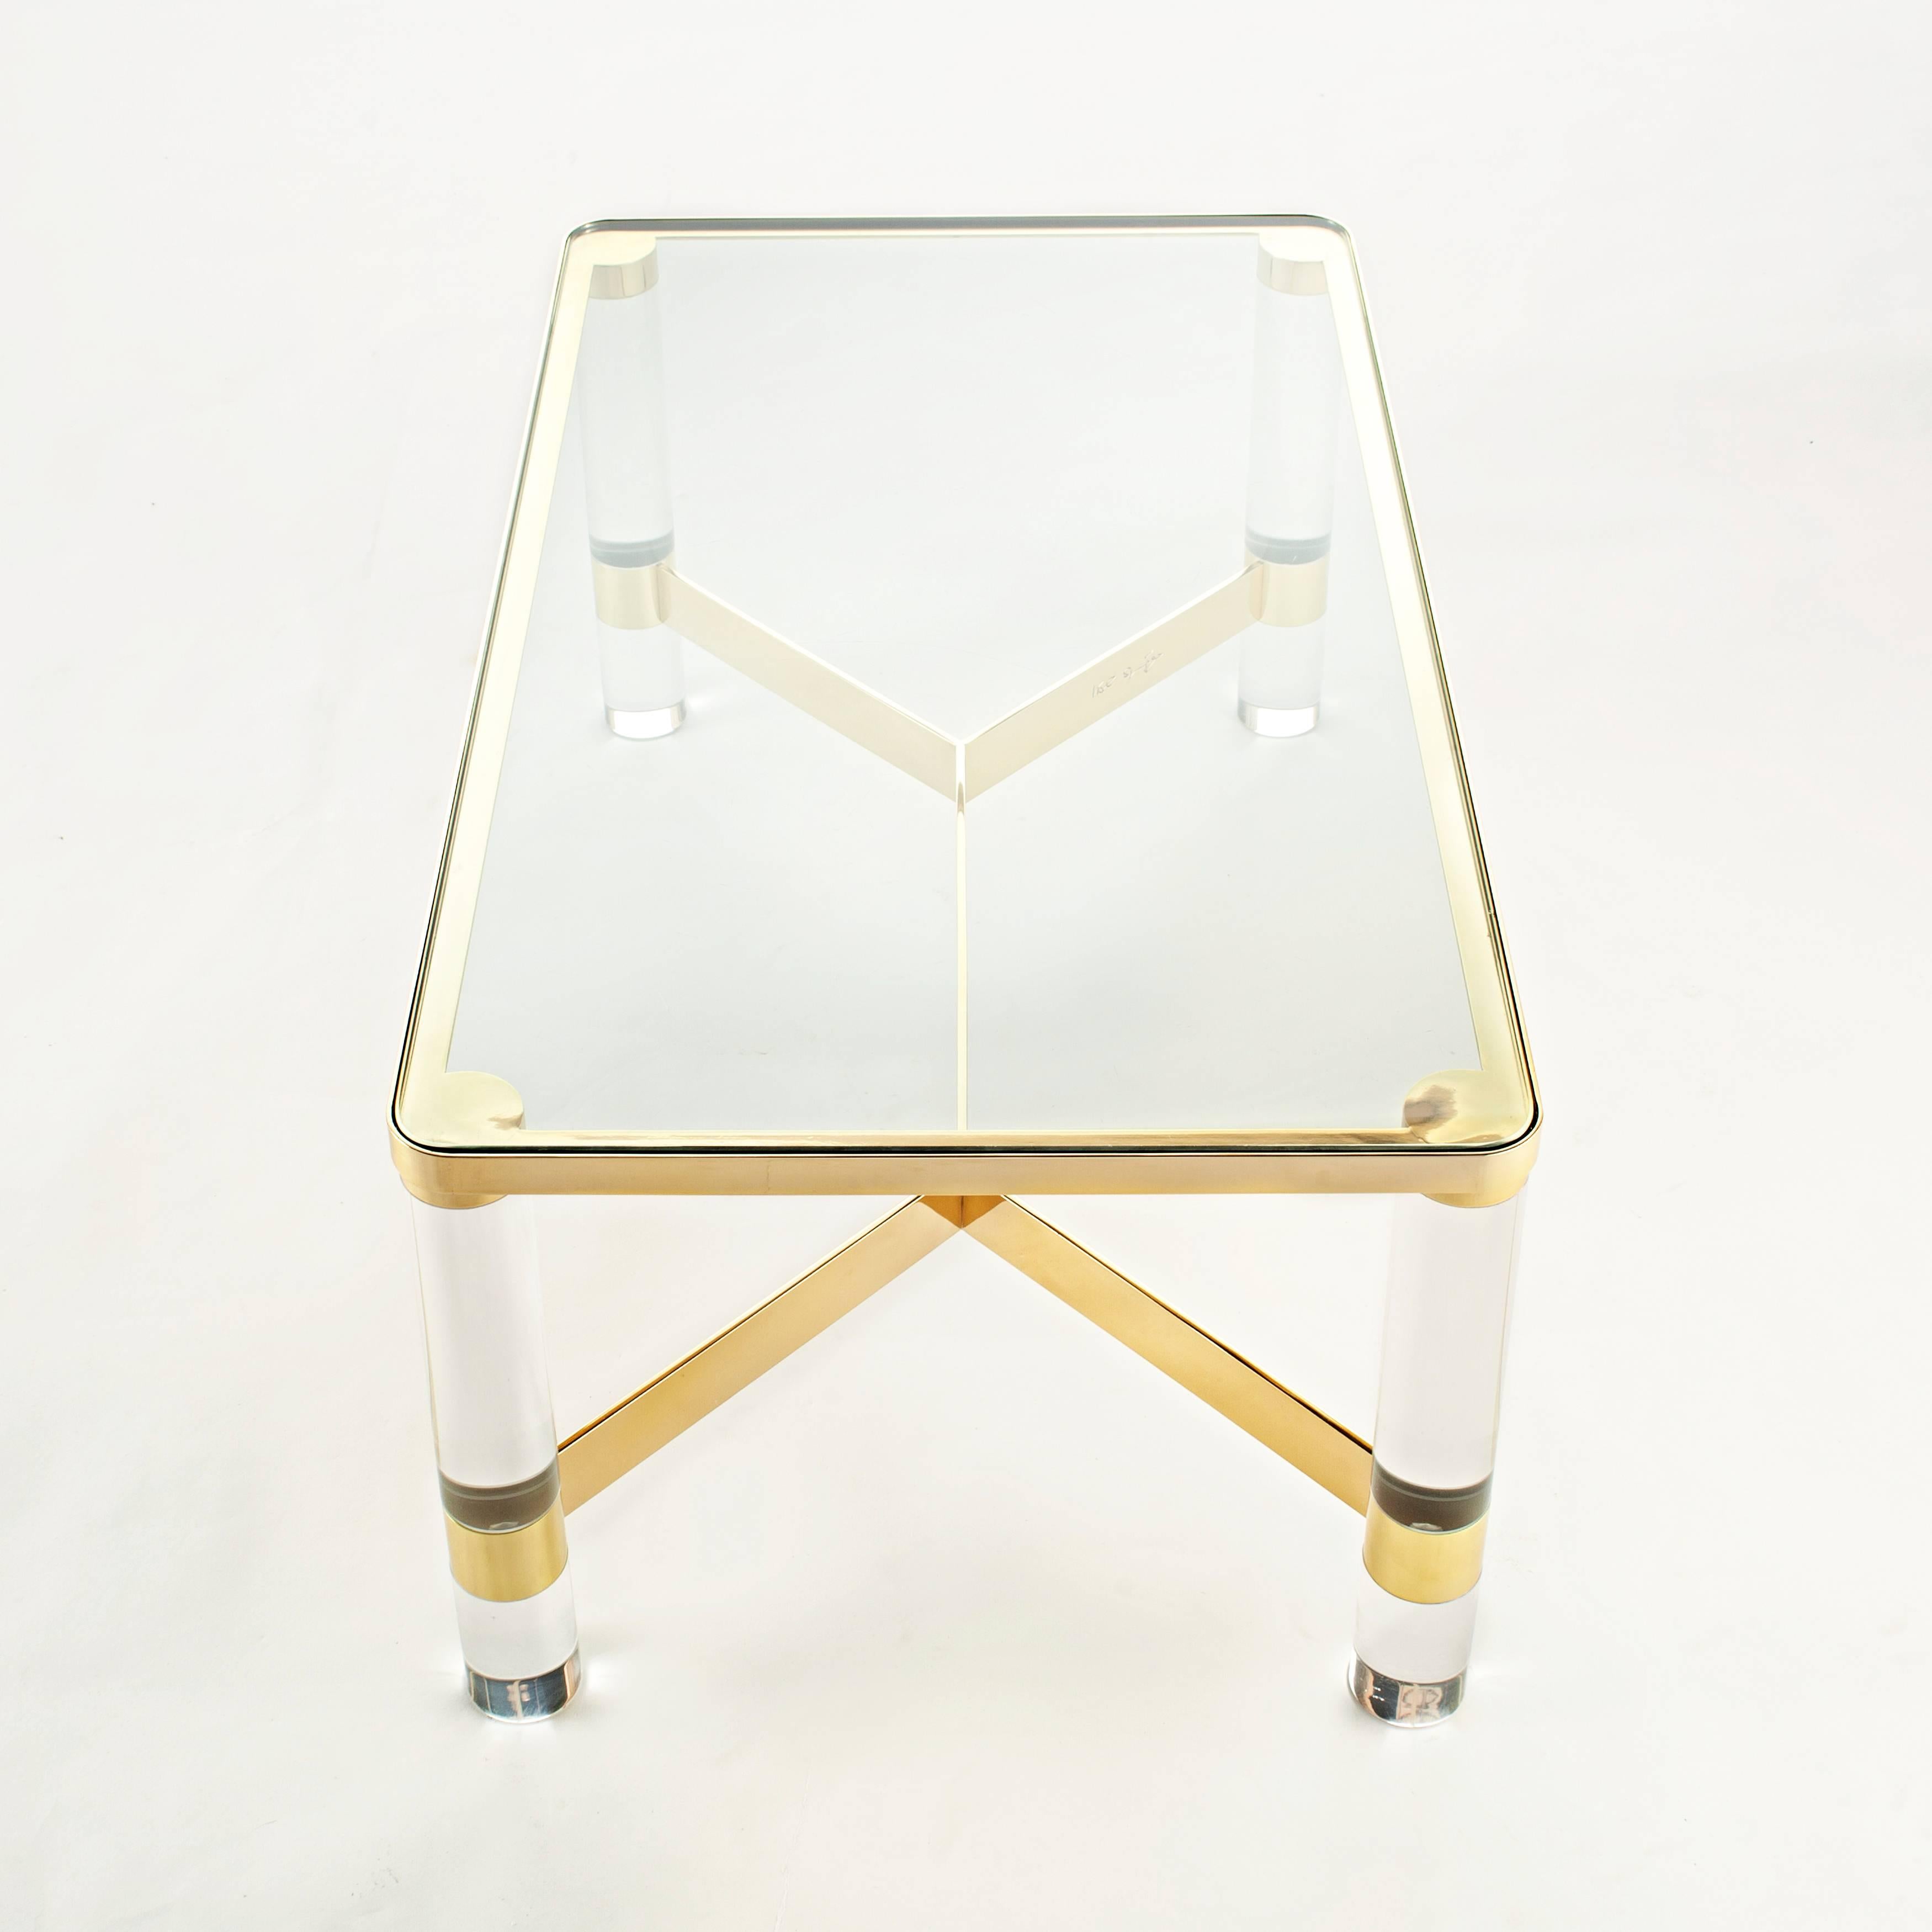 Late 20th Century Signed Karl Springer Brass and Lucite Cocktail Table, circa 1980s